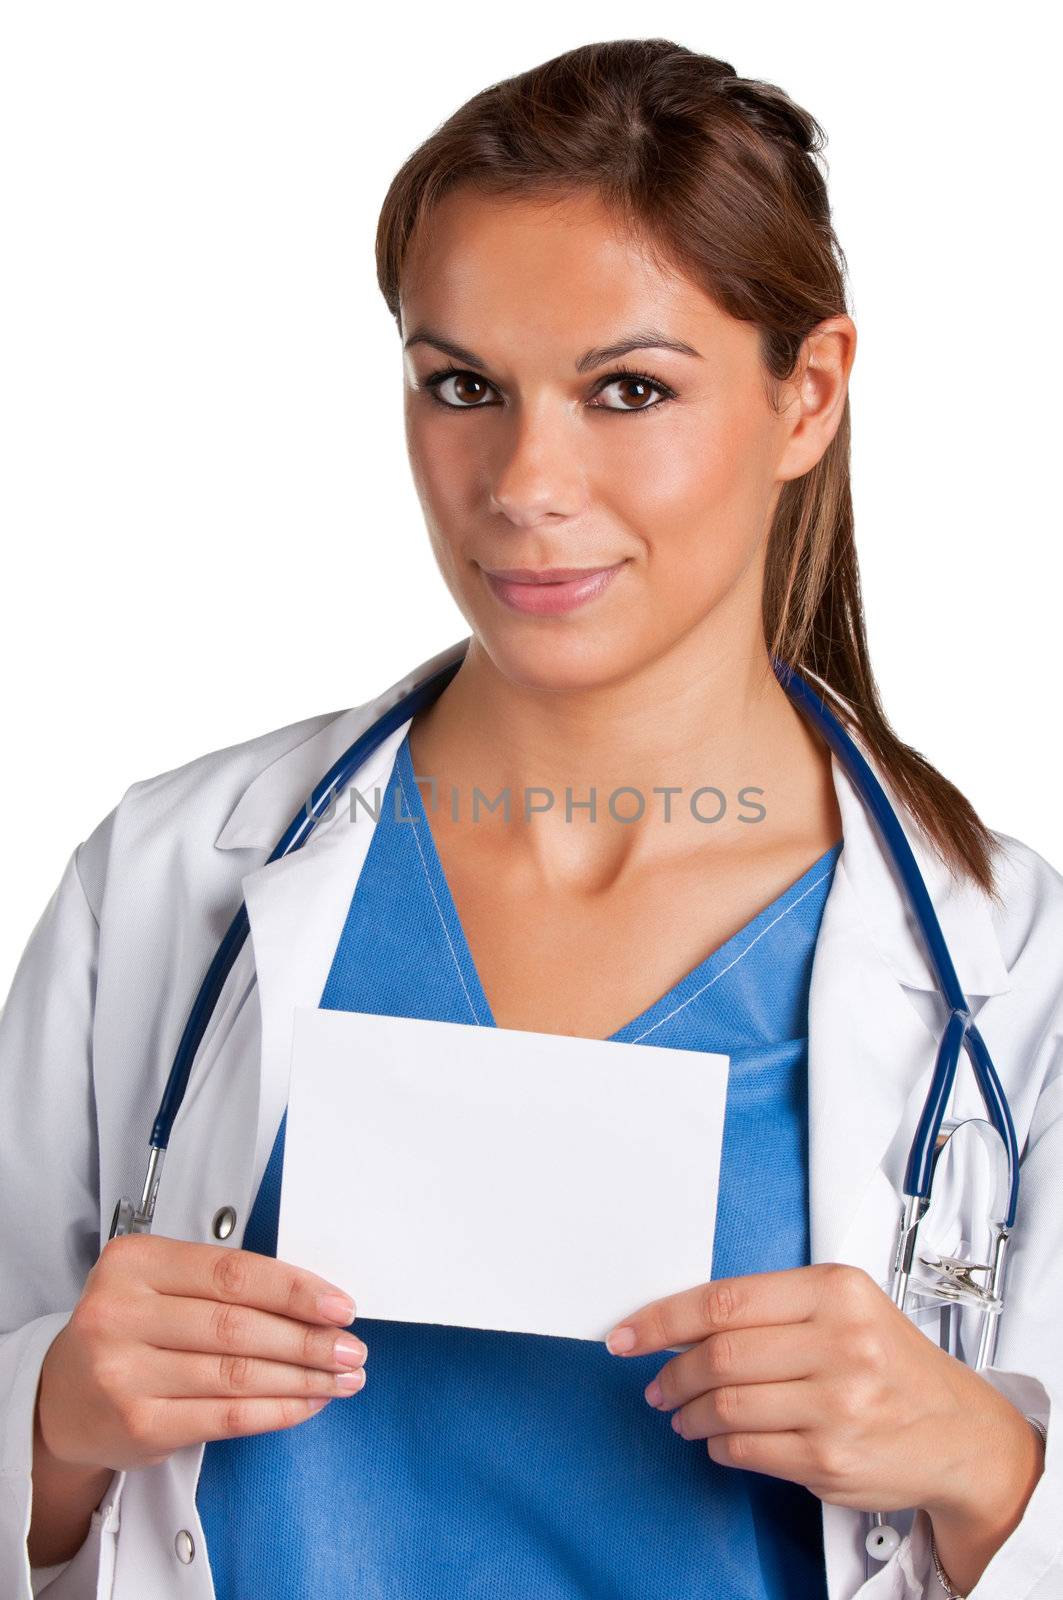 Young female doctor with a stethoscope holding a white card isolated in a white background